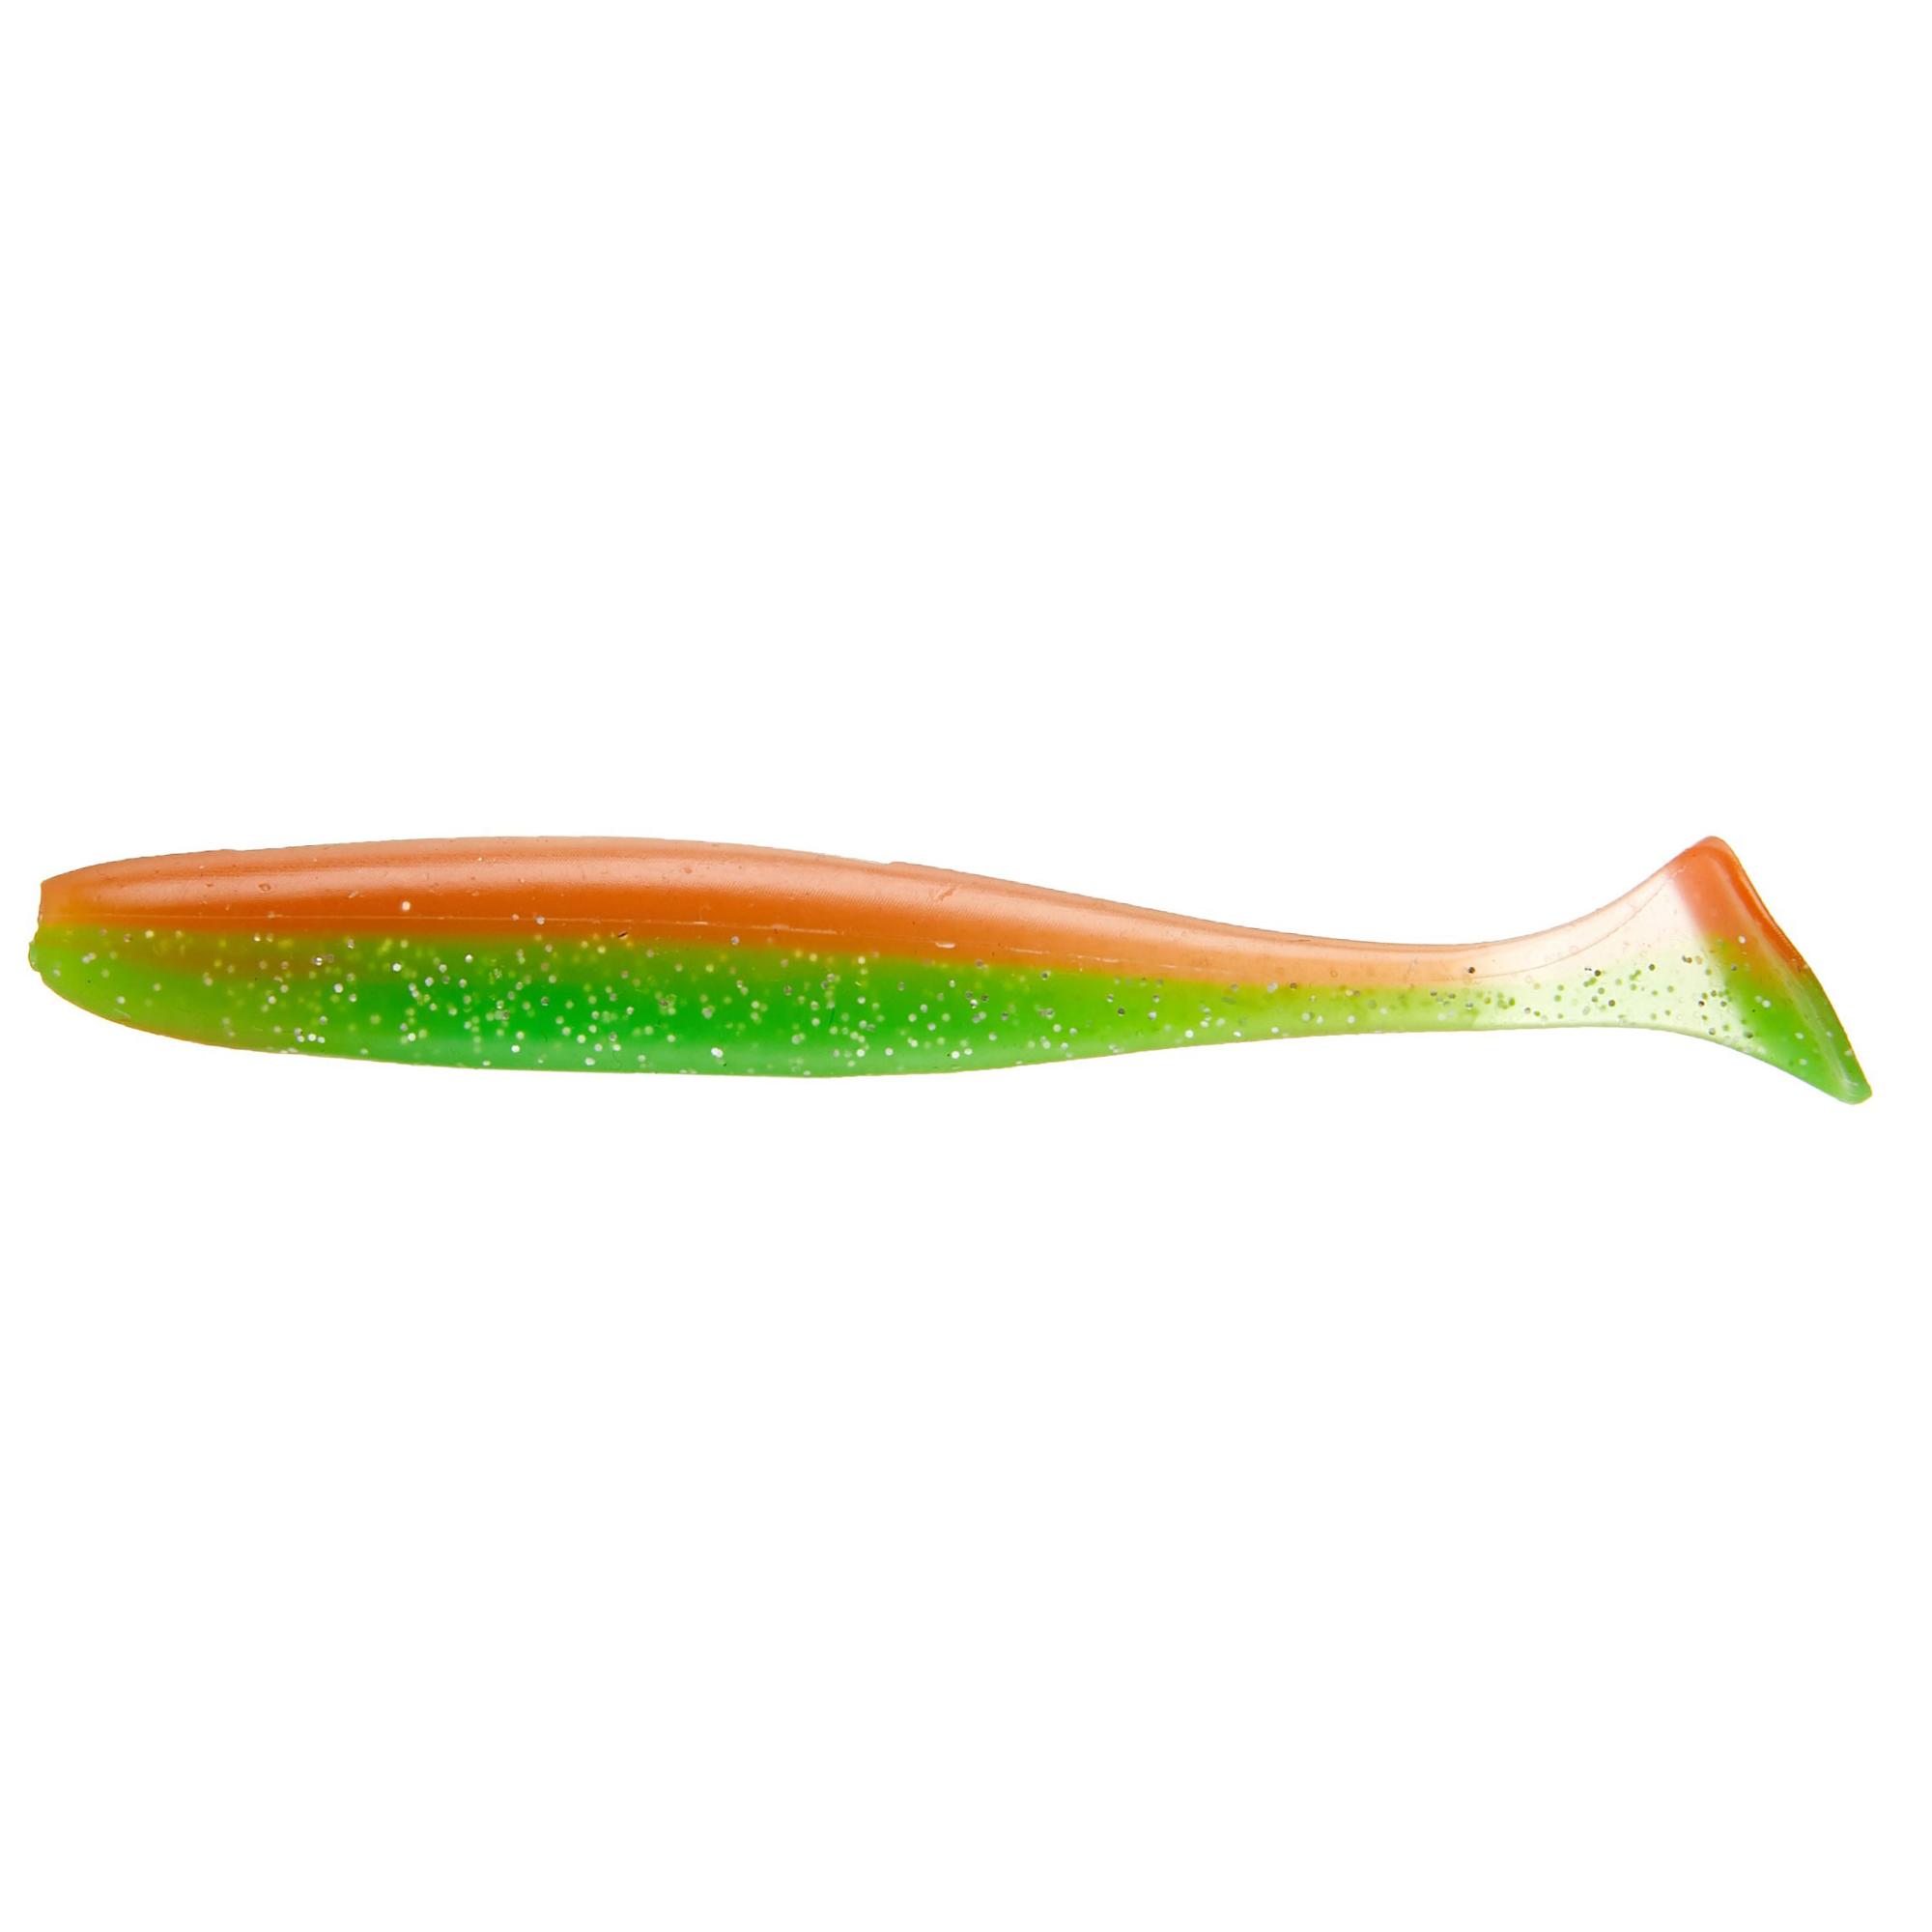 Buy Condor 90mm 105mm 5g 7.5g Soft Plastic Lure Molds Soft Fishing Lure  Soft Plastic Lure from Ruian Tuying Fishing Tackle Co., Ltd., China